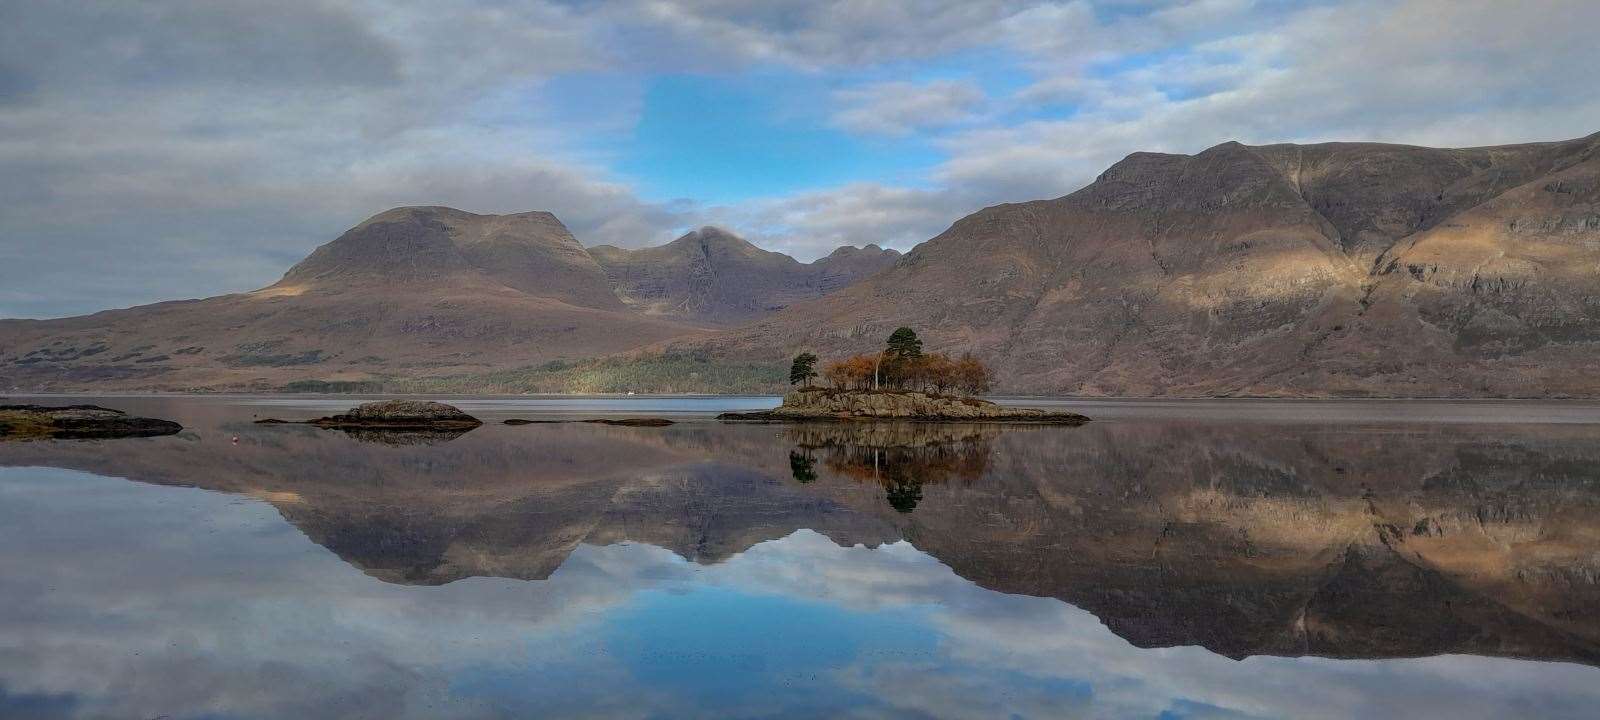 Jan Charge, Culrain, came second in the colour class with Mountain High, a beautifully peaceful shot of Loch Torridon